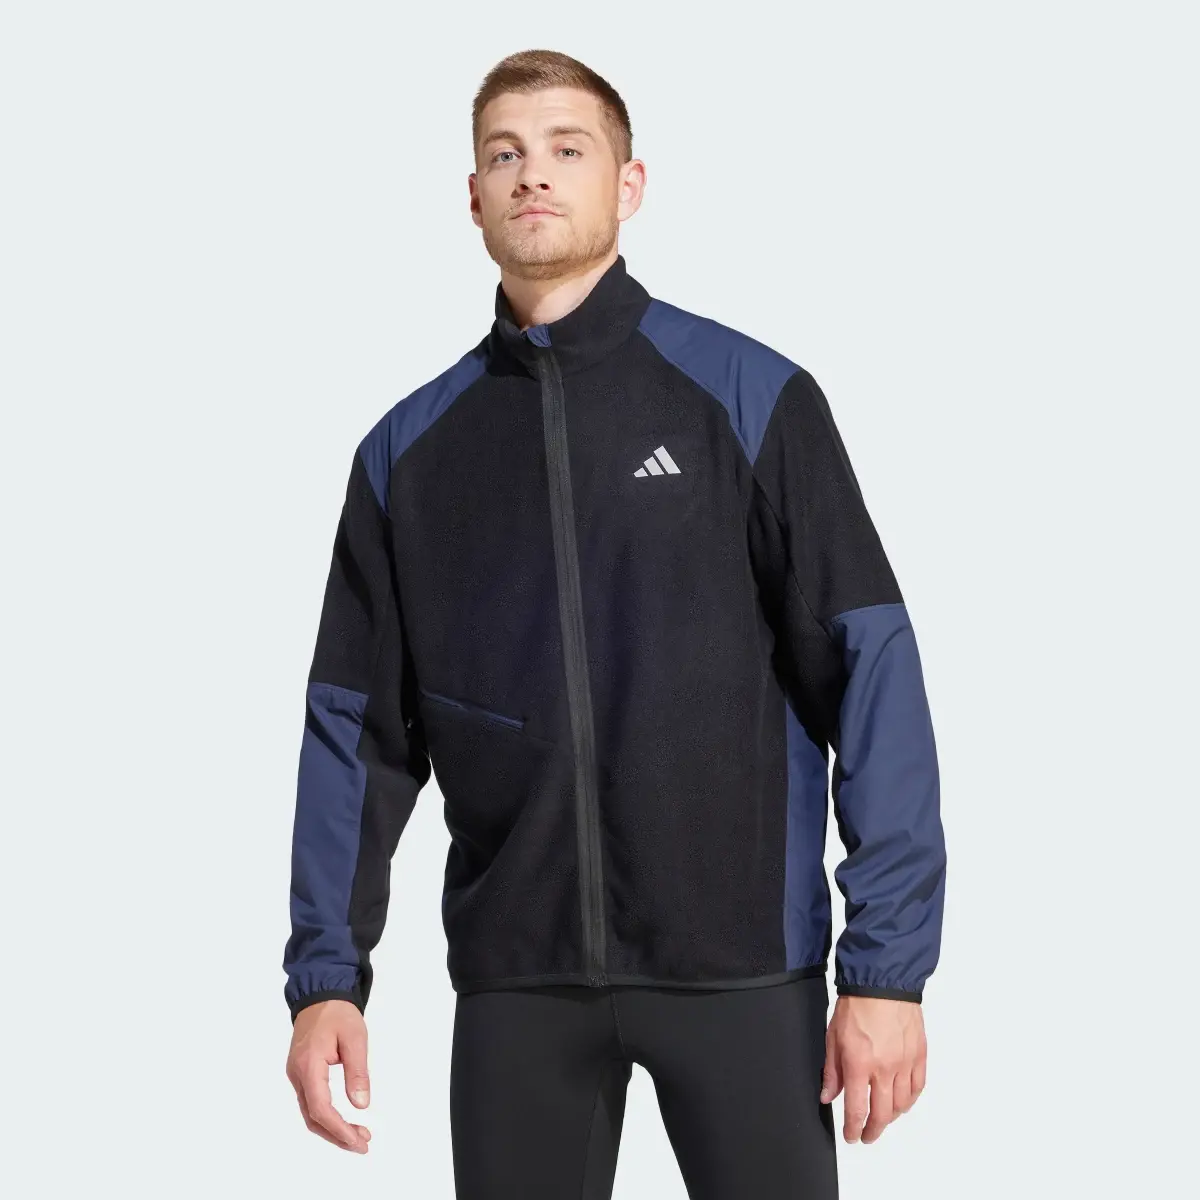 Adidas Ultimate Running Conquer the Elements Jacke. 2